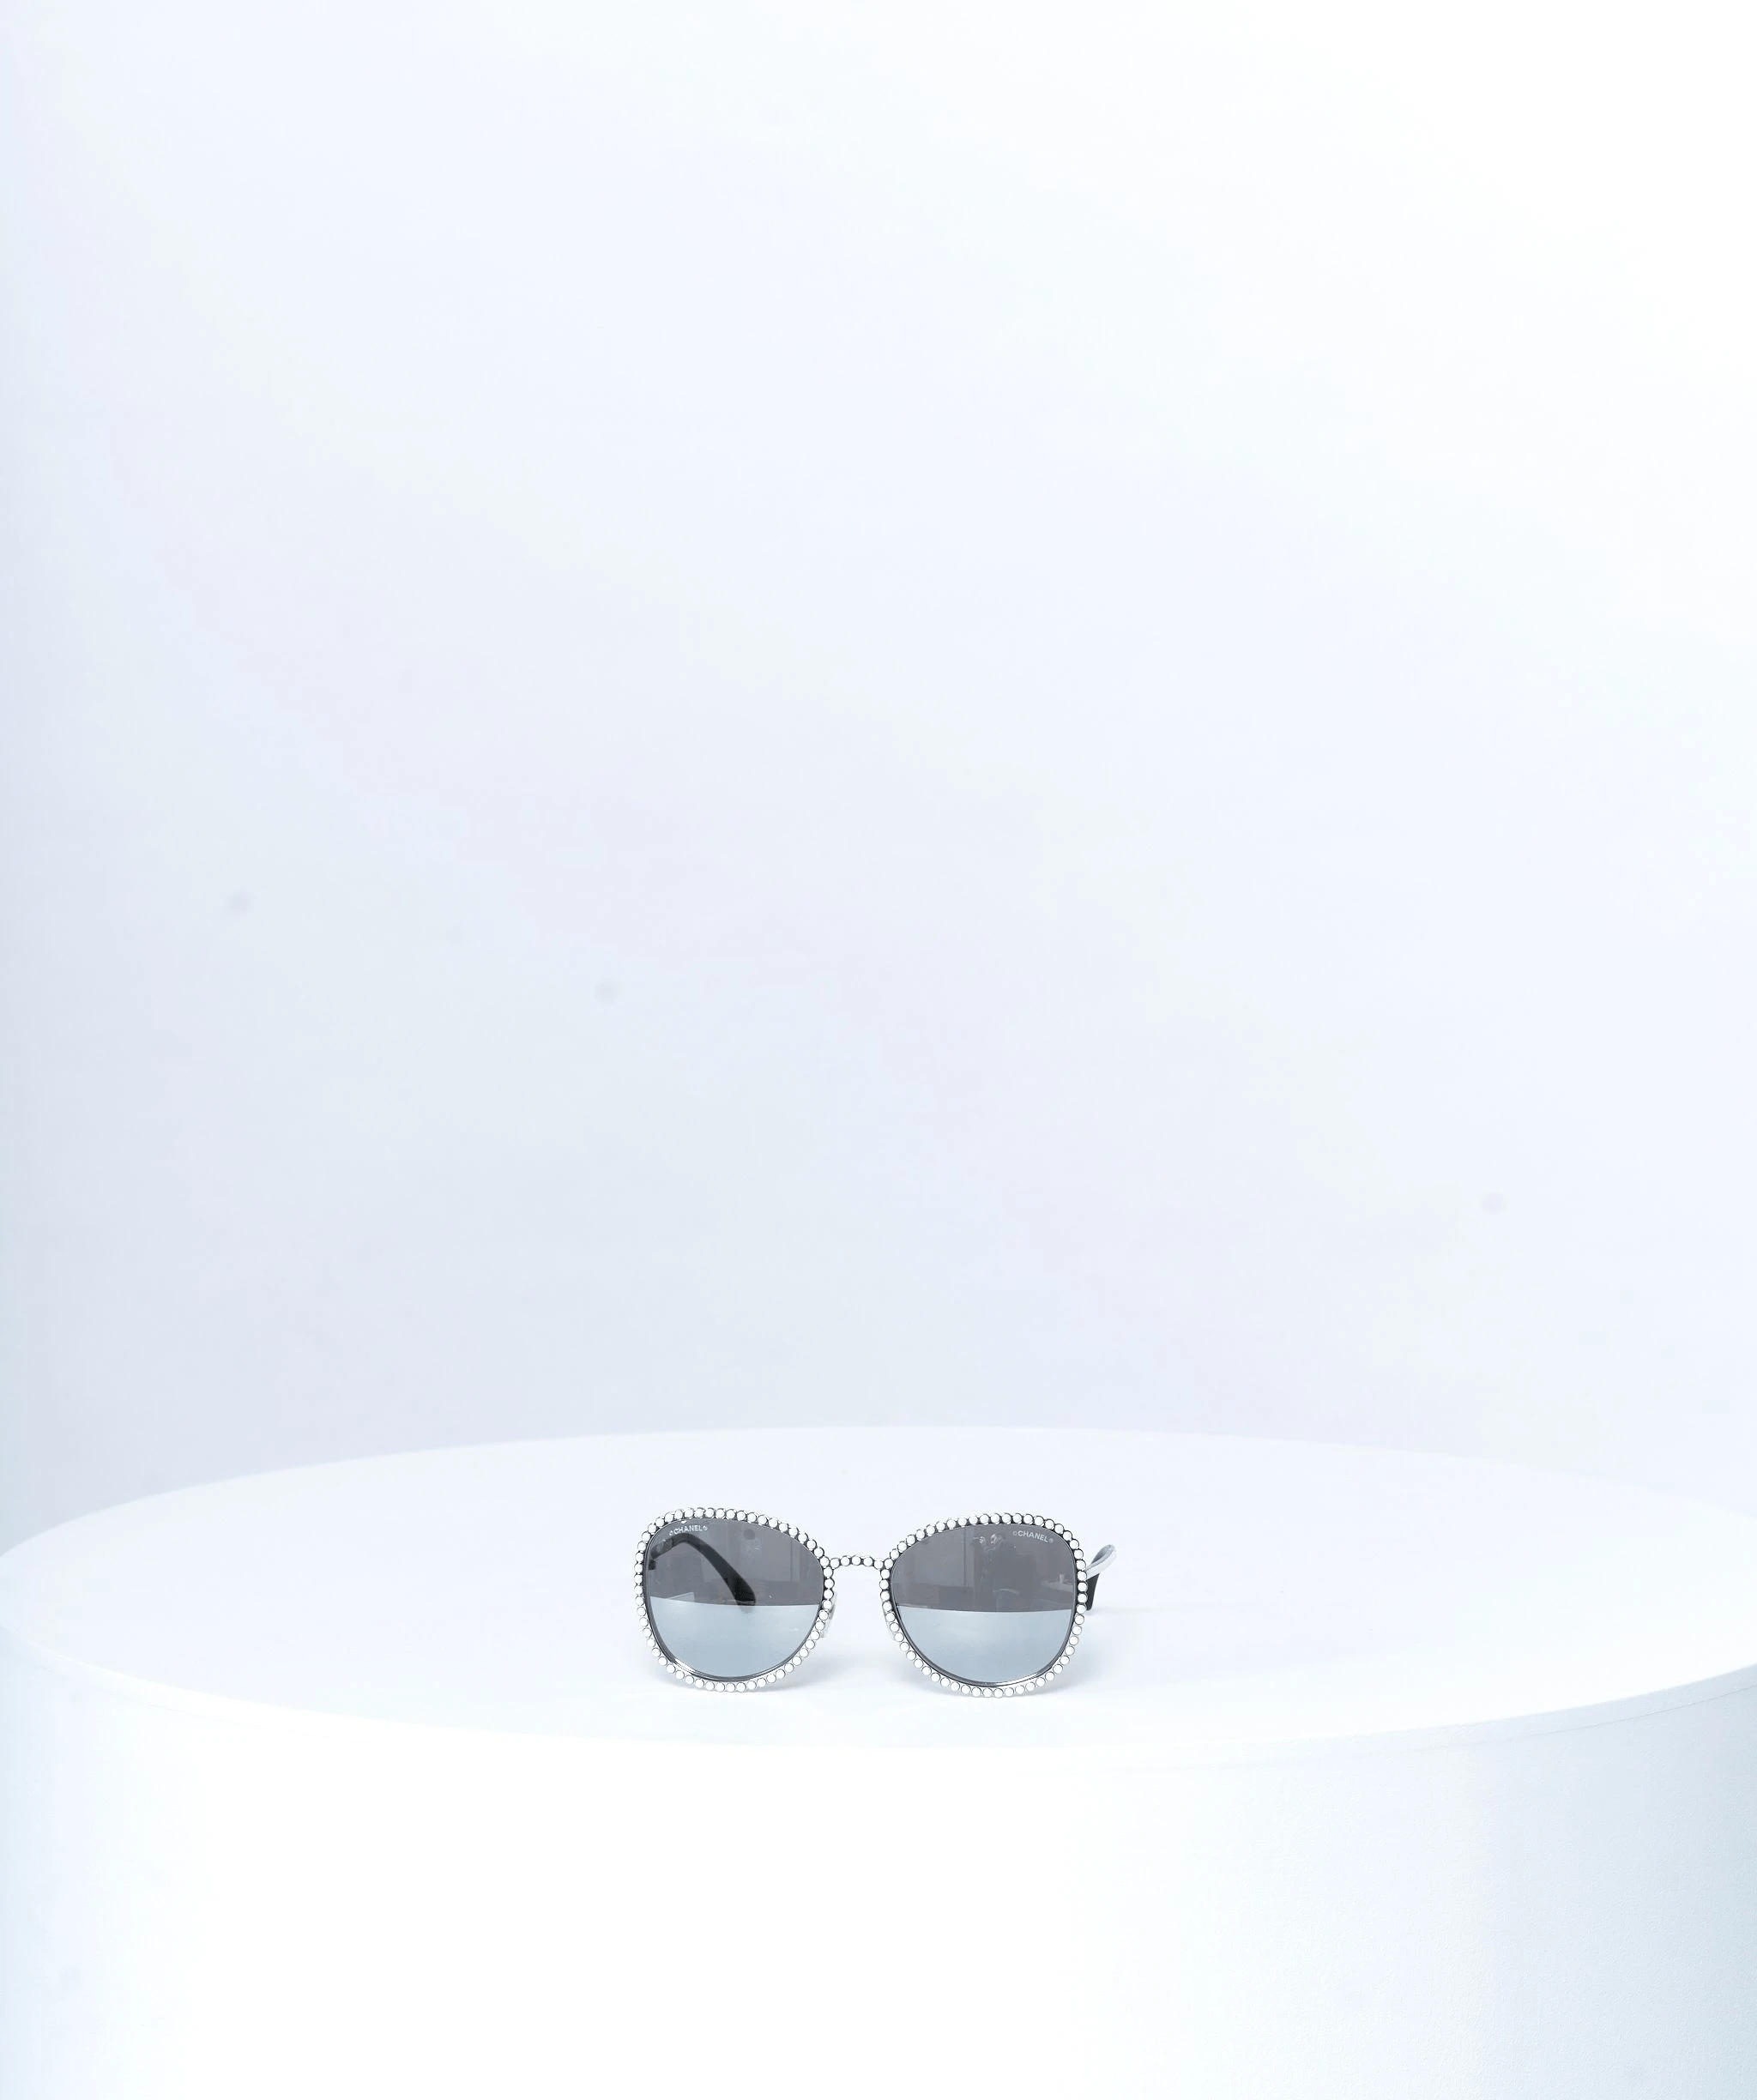 Chanel Chanel pearl detailing sunglasses